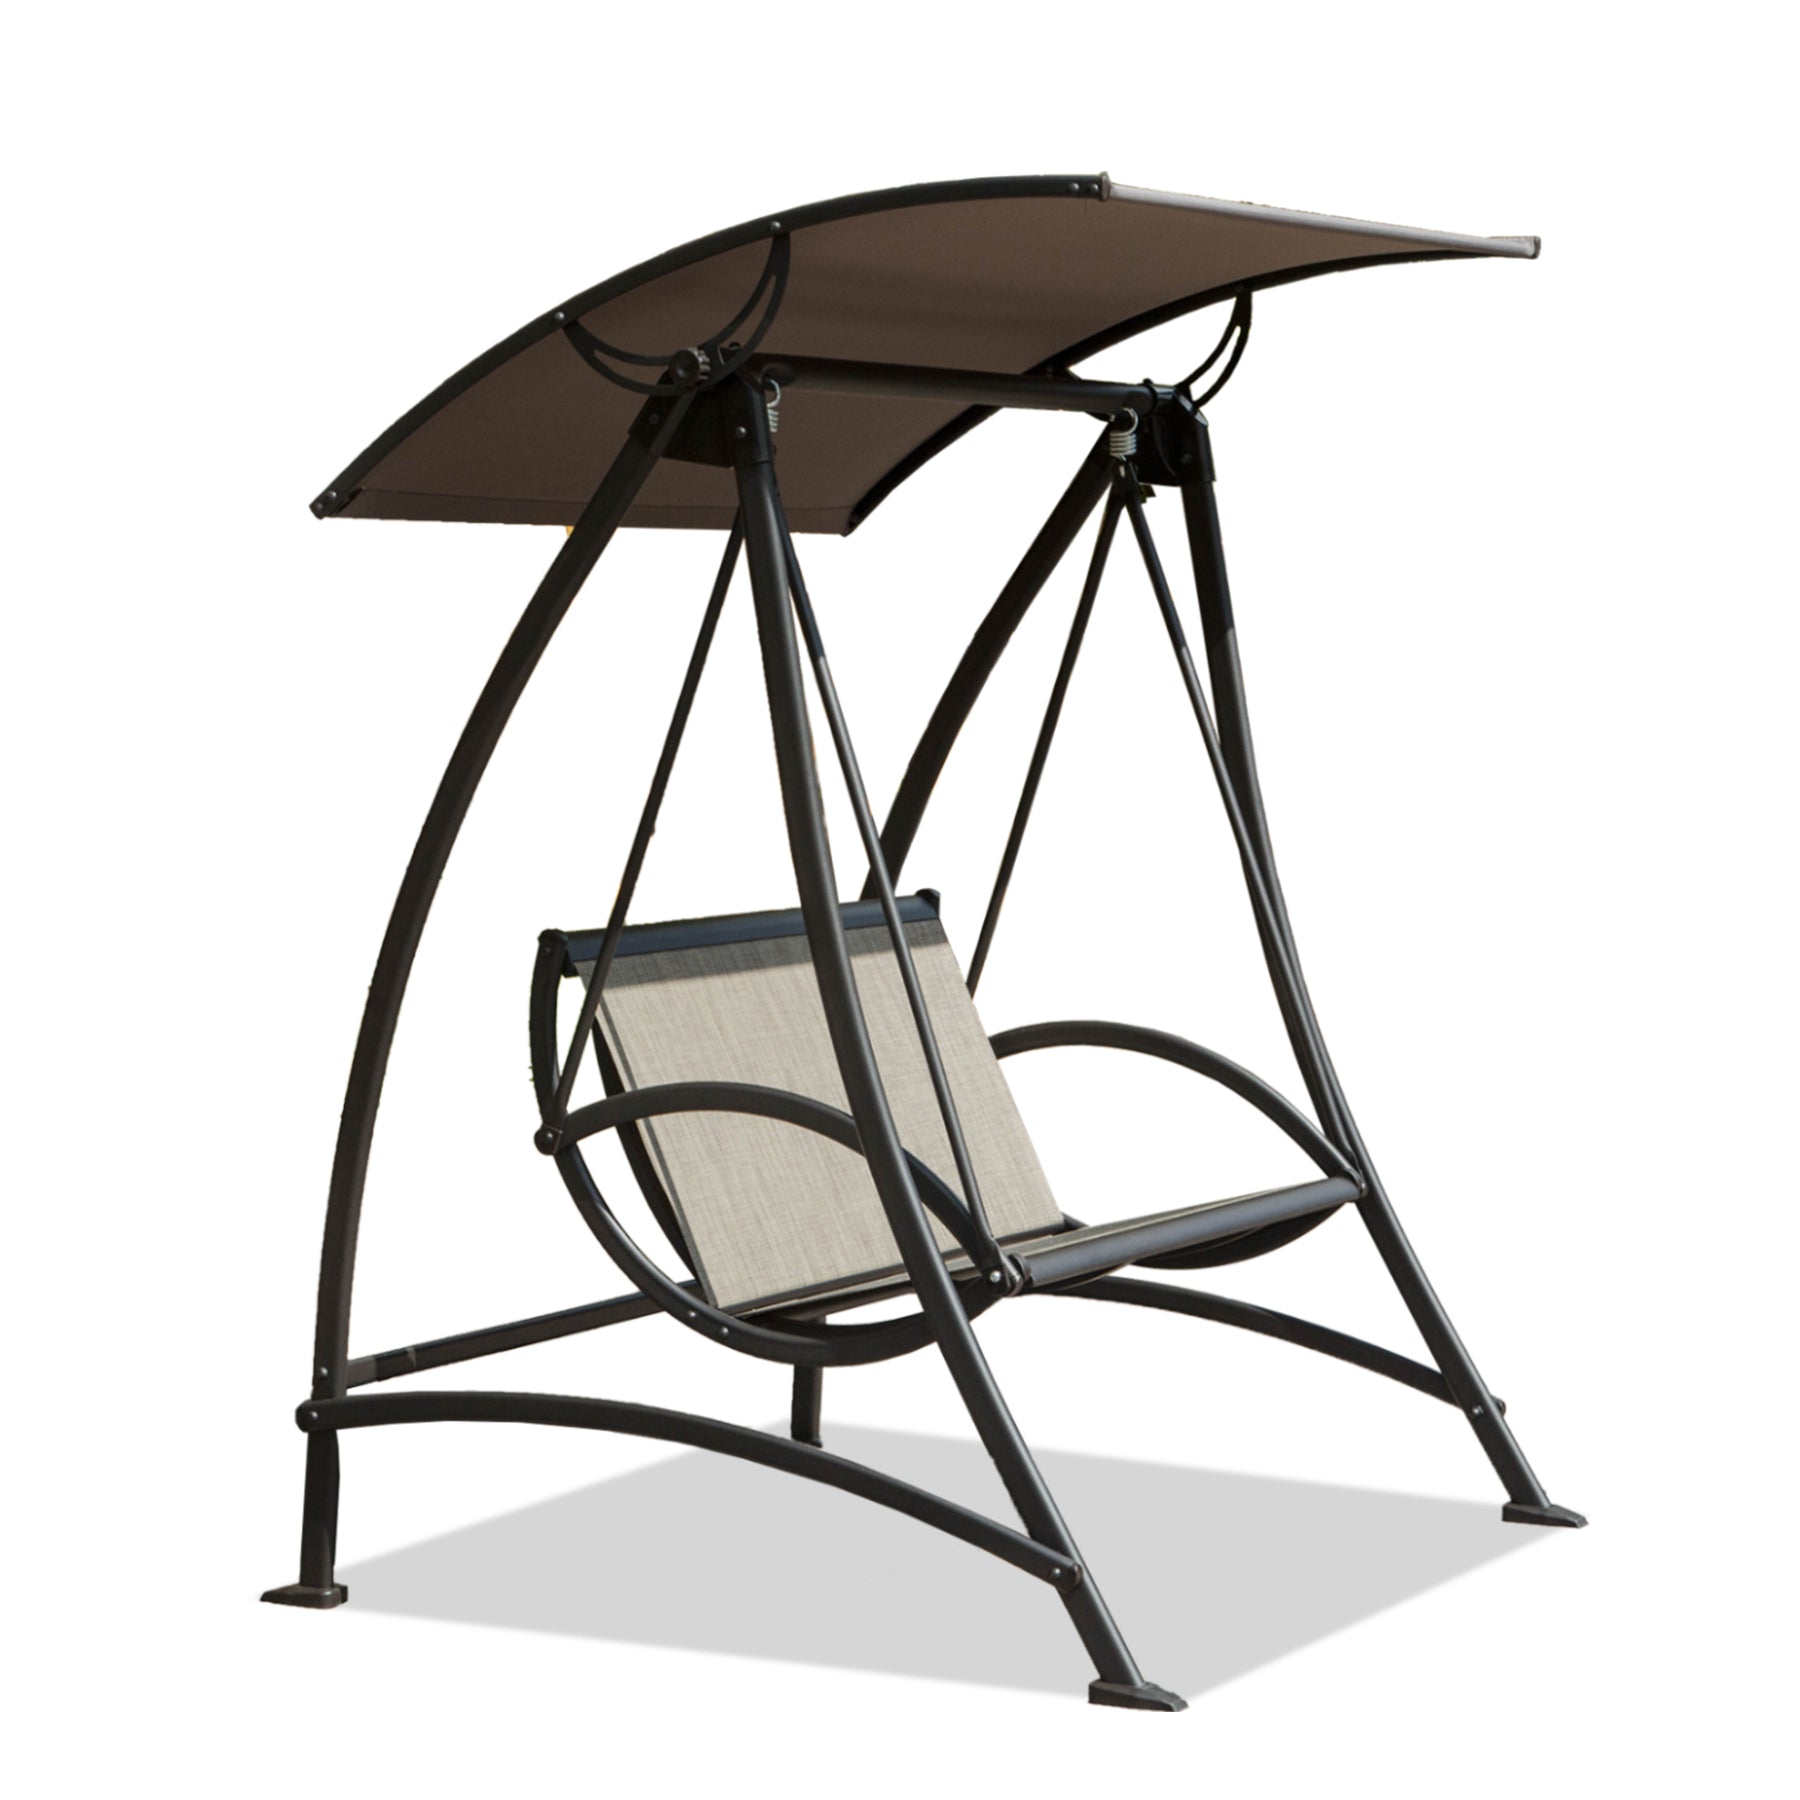 2-Seat-Outdoor-Porch-Swing-with-Adjustable-Canopy-Furniture-|-Outdoor-Furniture-|-Outdoor-Seating-|-Outdoor-Chairs